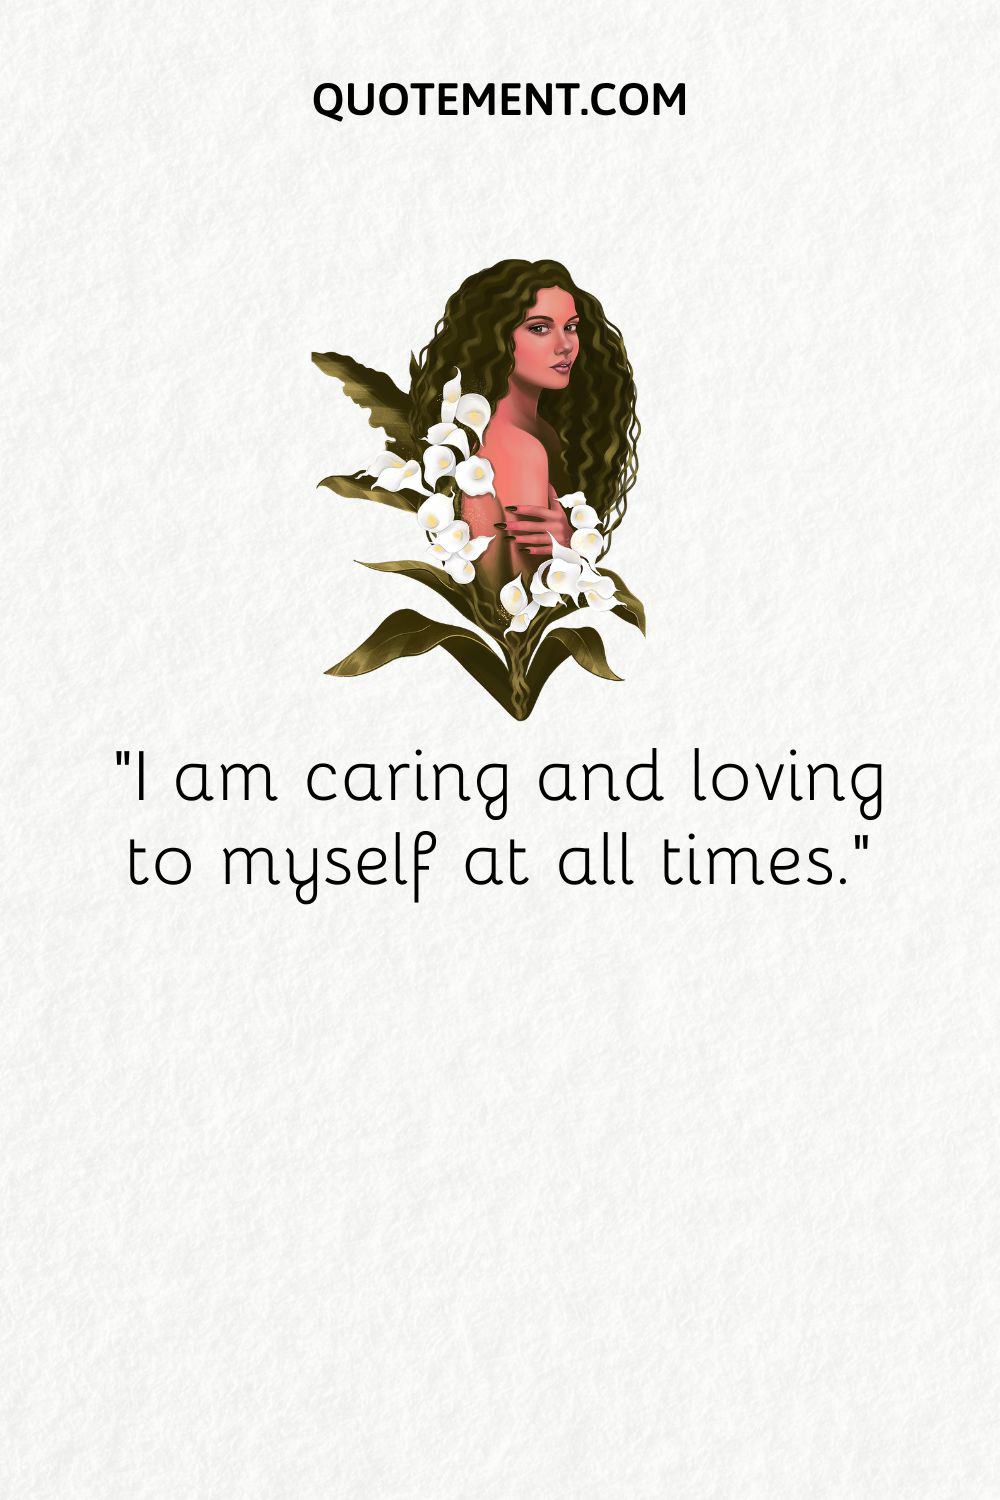 I am caring and loving to myself at all times